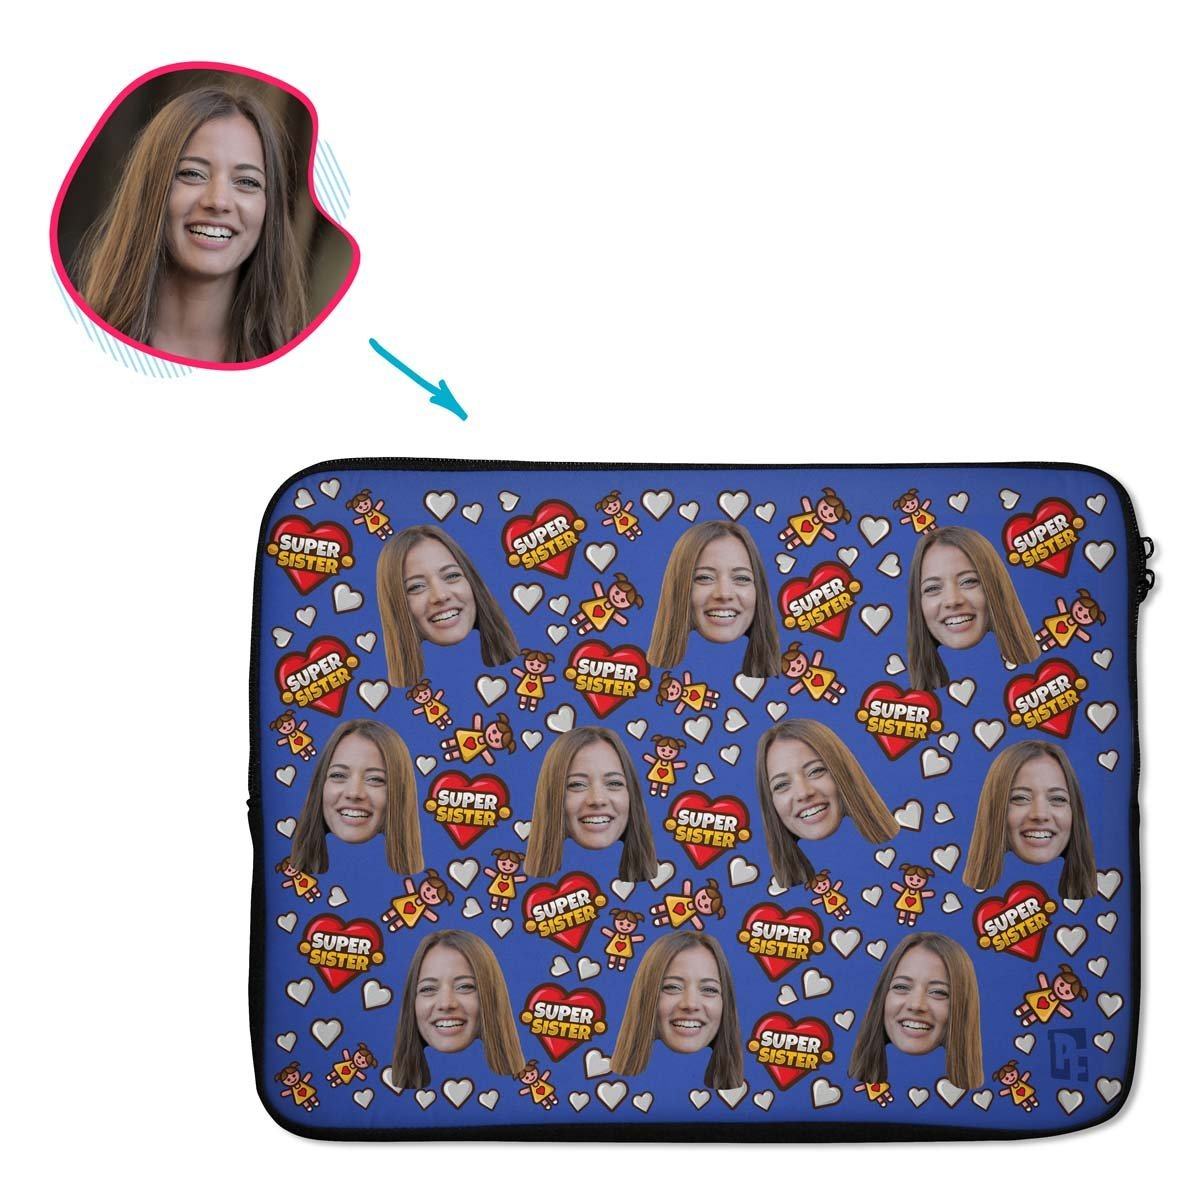 darkblue Super Sister laptop sleeve personalized with photo of face printed on them